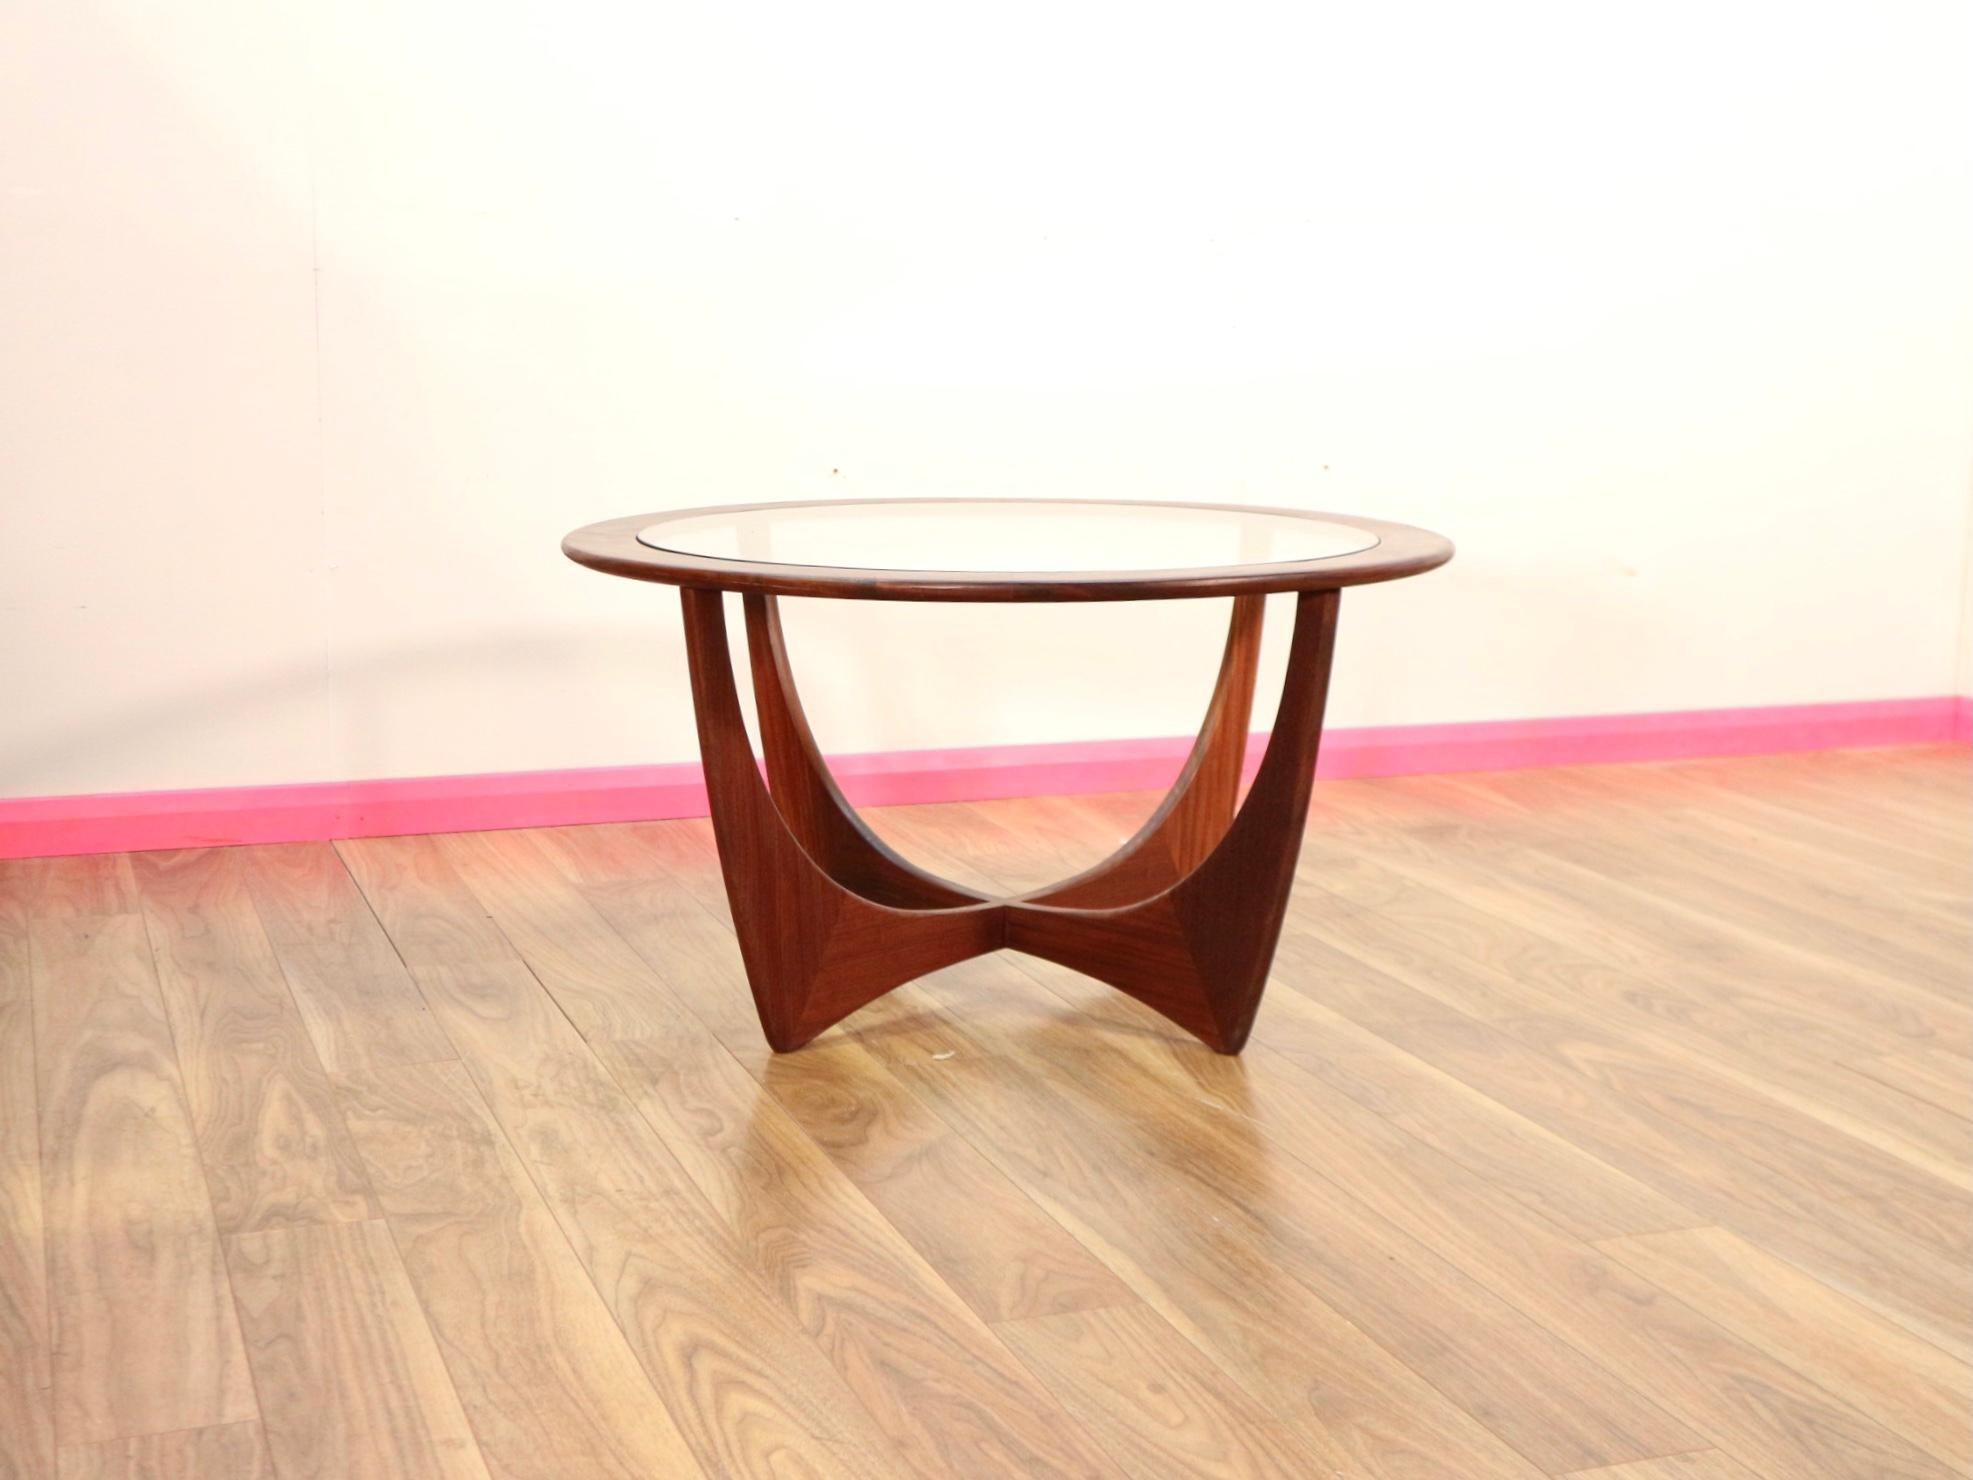 A Midcentury oval Astro teak coffee table with glass top by G-Plan in the 1960s. A uniquely beautiful sculptural coffee table designed by Victor Wilkins and manufactured by Gplan in England, the legs especially scream style.